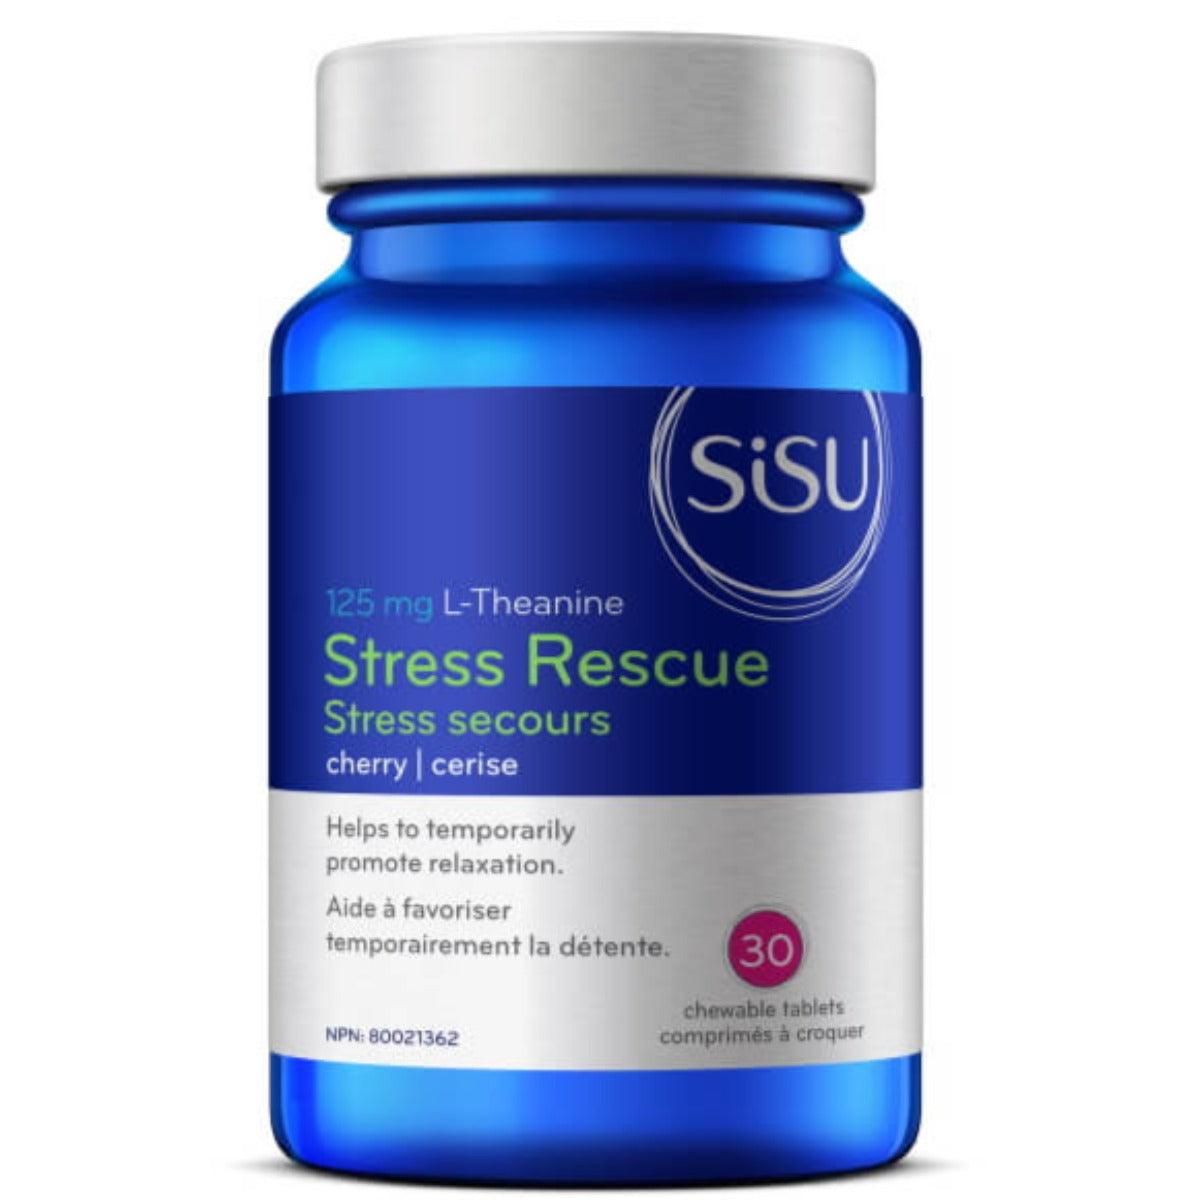 SiSU Stress Rescue 125mg L-Theanine Cherry 30 Chewable Tabs Supplements - Stress at Village Vitamin Store